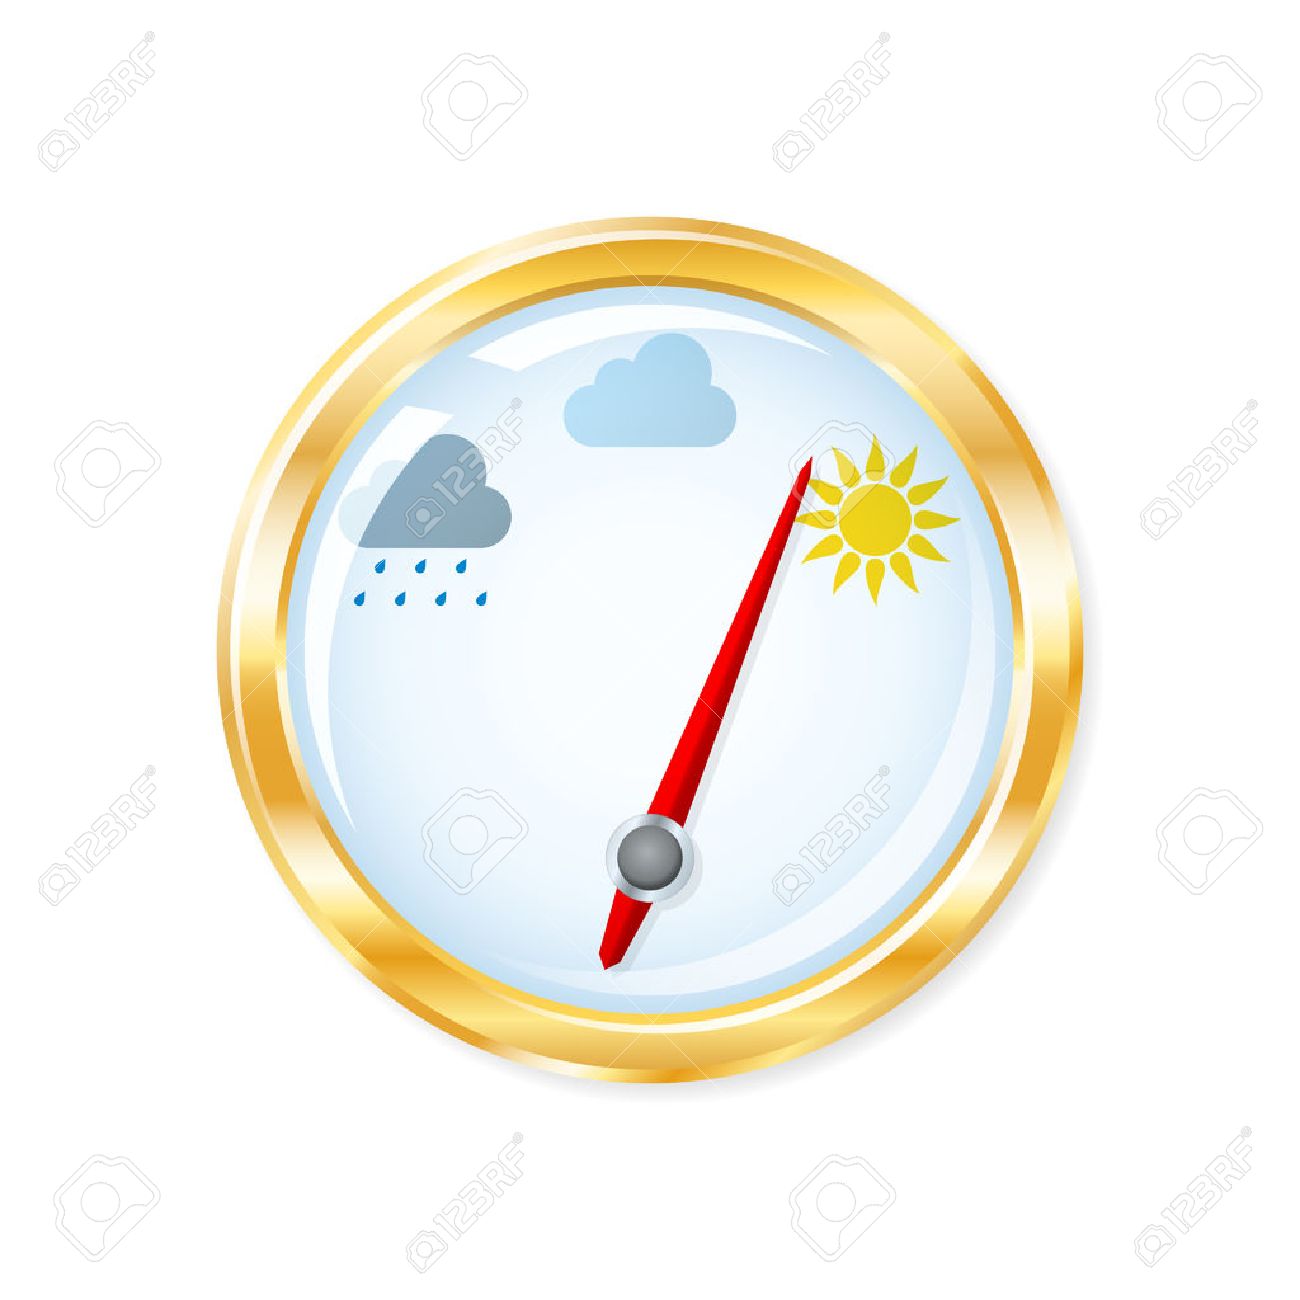 Barometer measuring indicates sunny weather. Vector illustration. Stock  Vector - 23167496